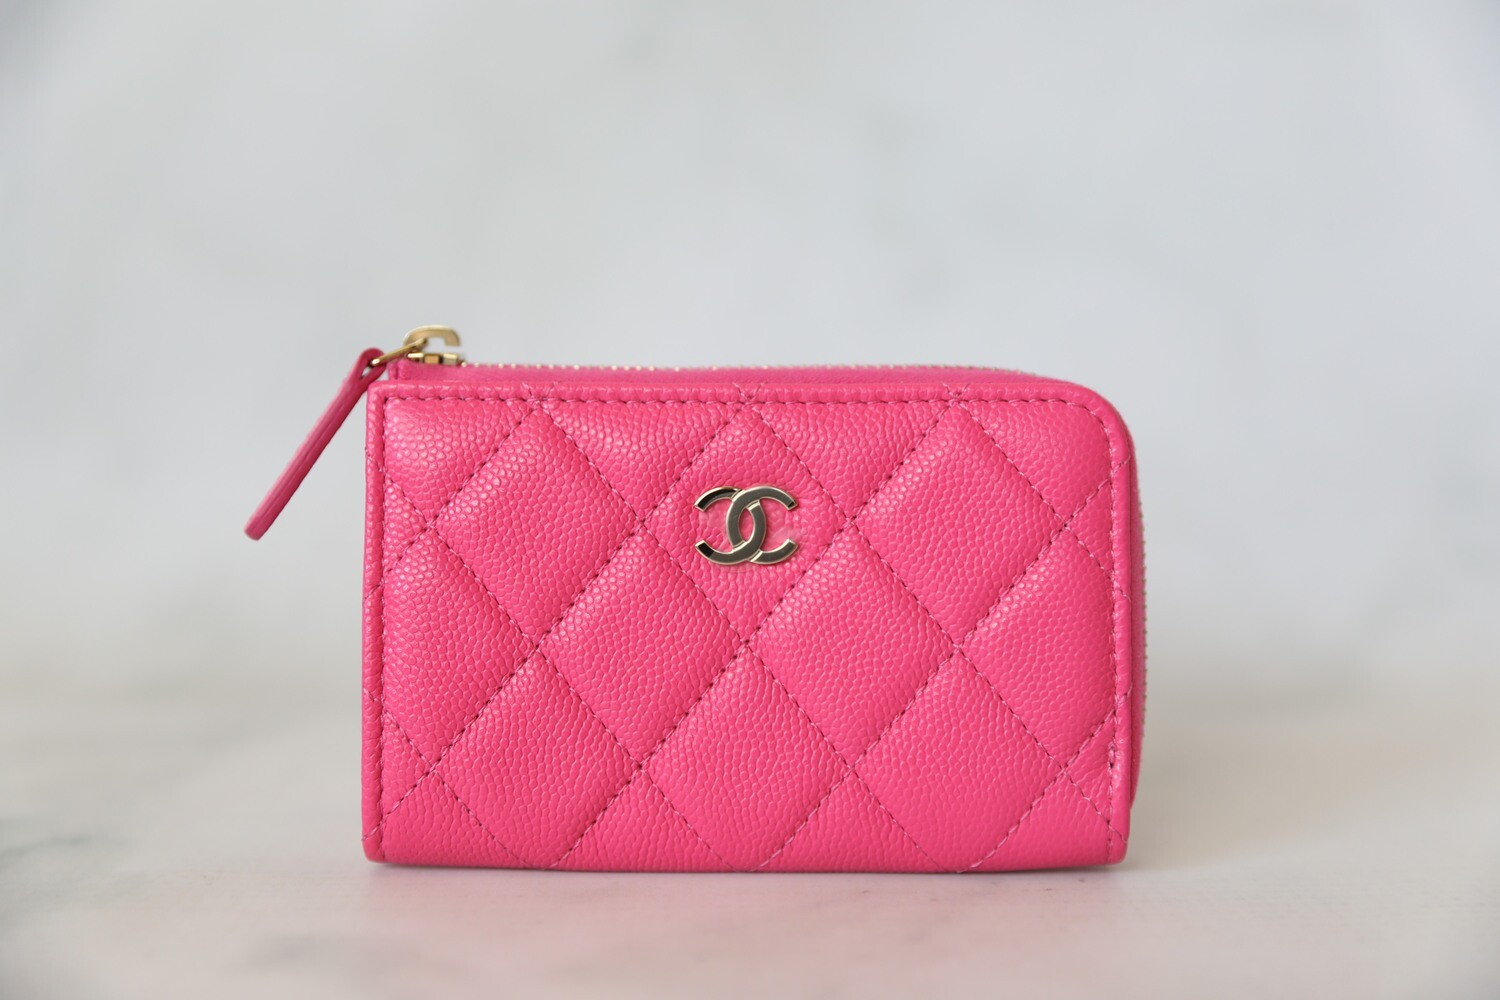 Chanel Zip Key and Card Holder, Pink Caviar with Gold Hardware, New in Box  WA001